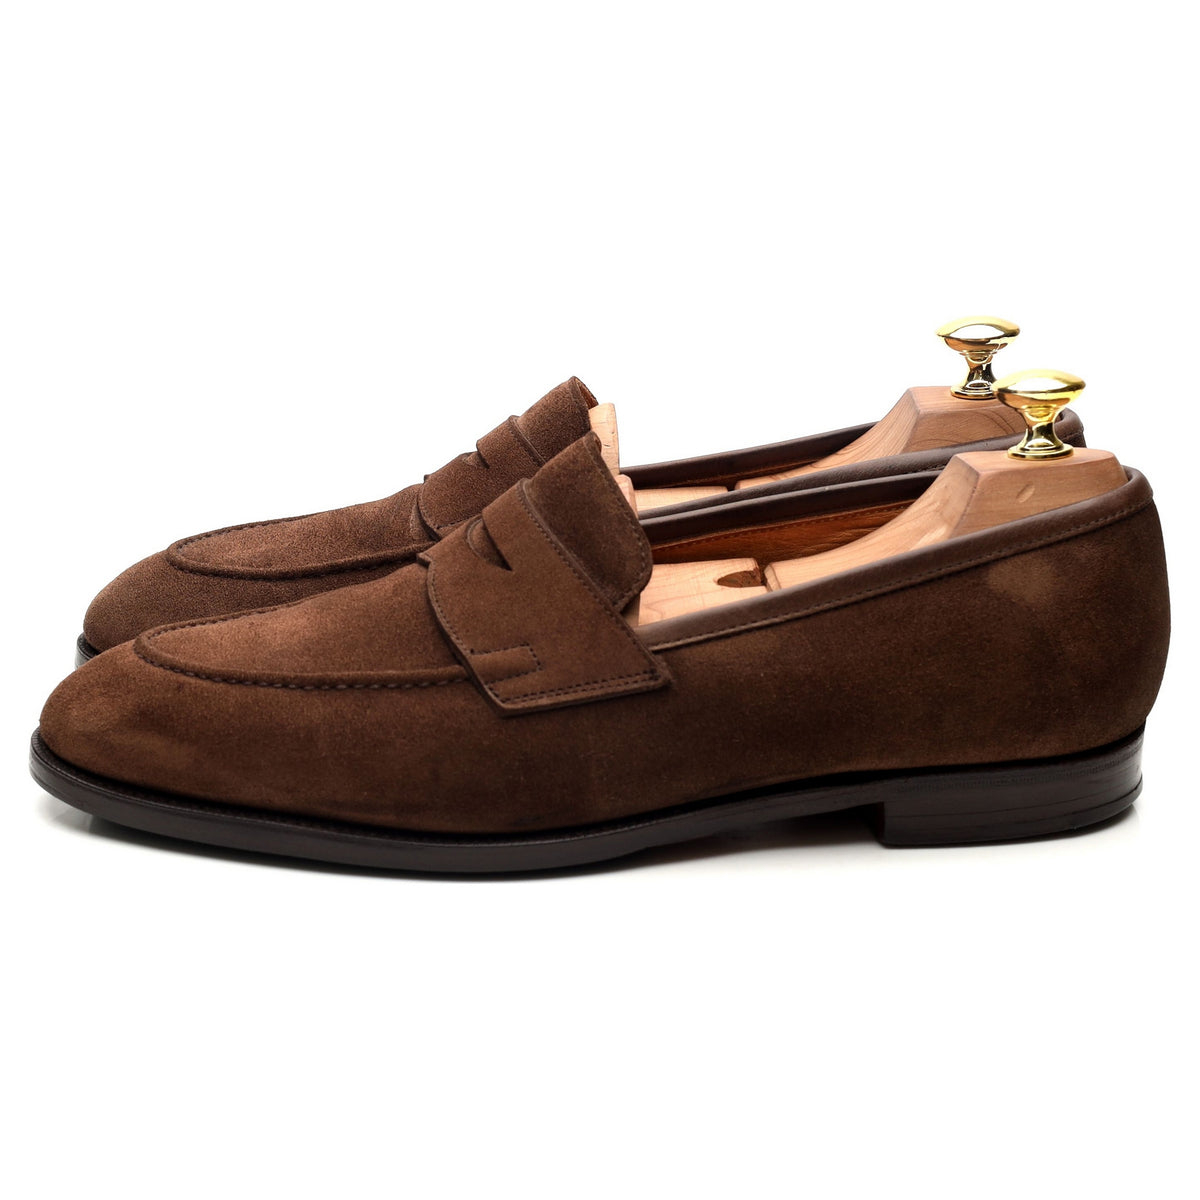 Brown Suede Loafers UK 8 E US 8.5 D